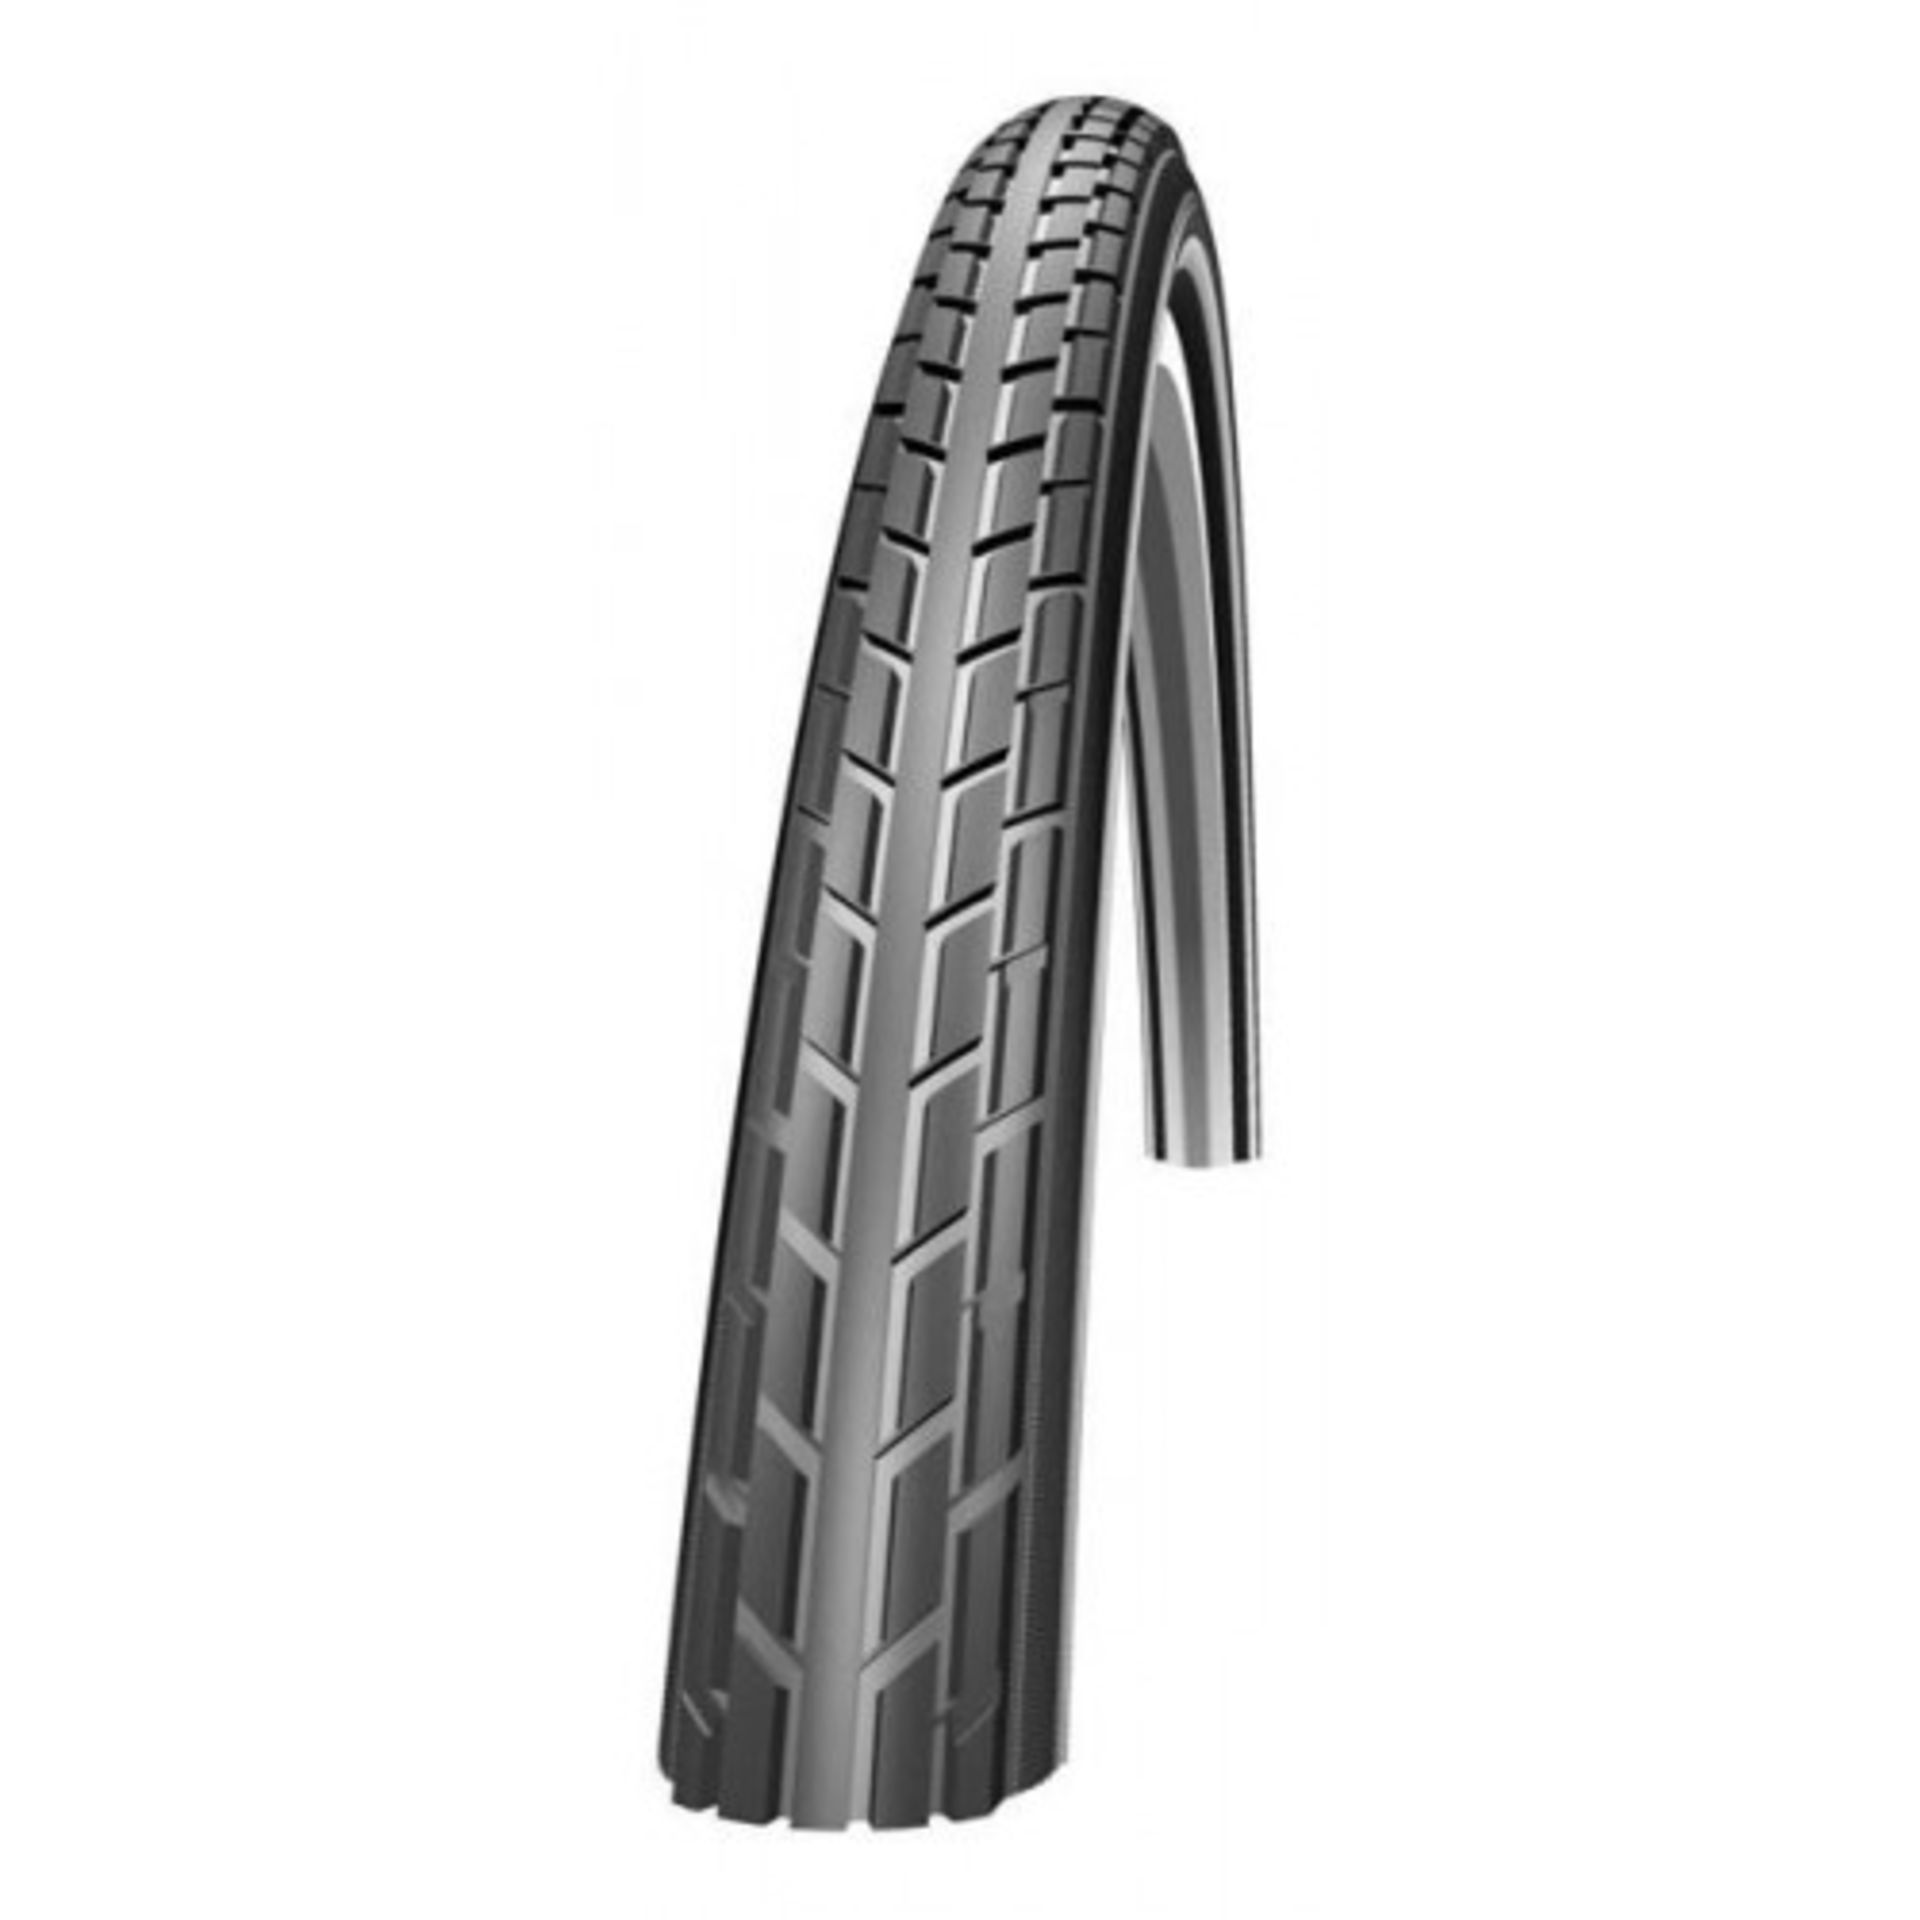 24 x Cycling Tyres in Various Sizes and Styles - Please see list for more information RRP £392.74 - Image 4 of 5